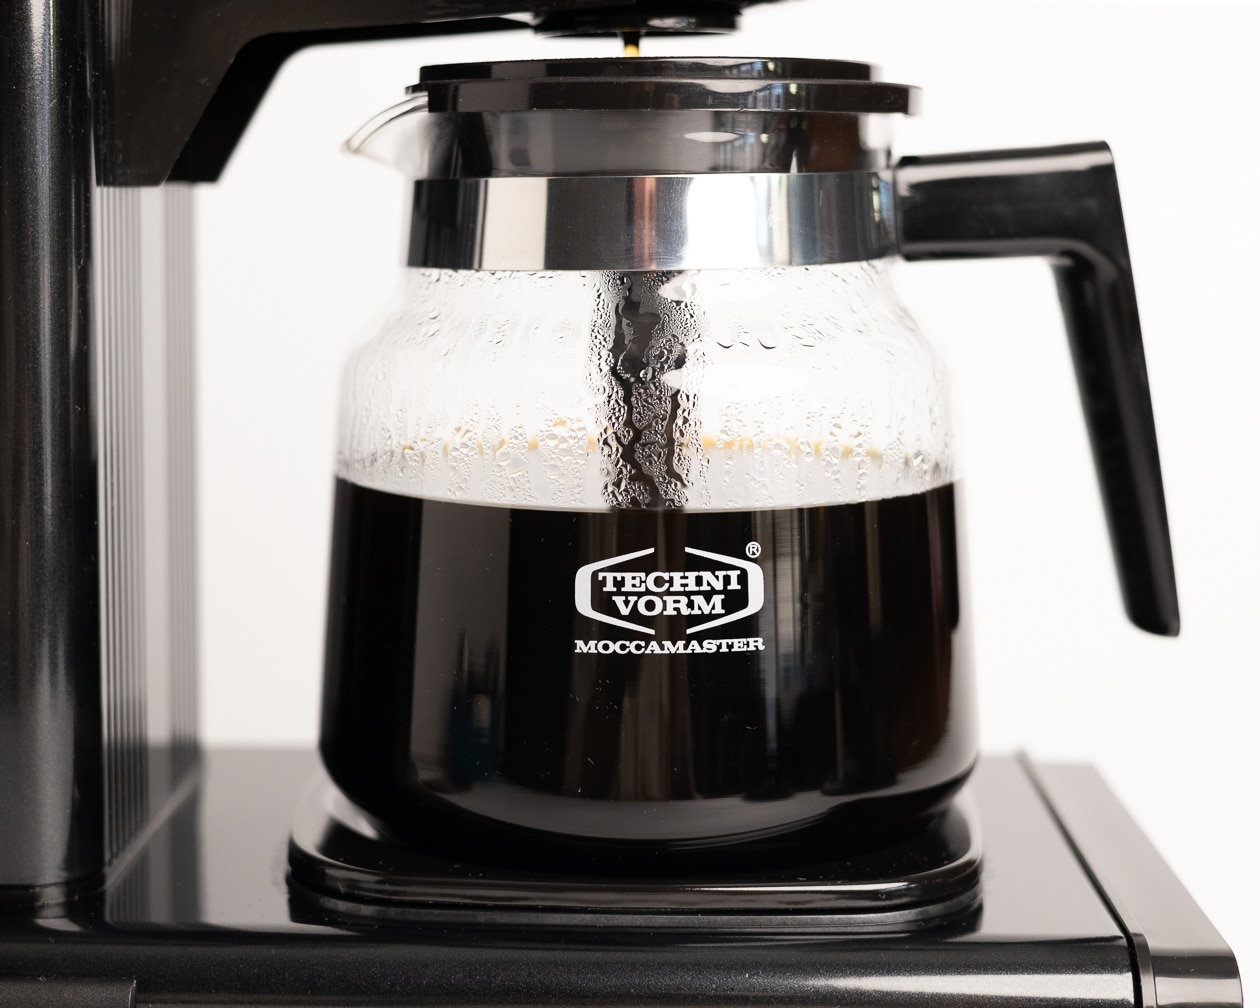 OXO Compact Cold Brew Maker – FreeForm Coffee Roasters